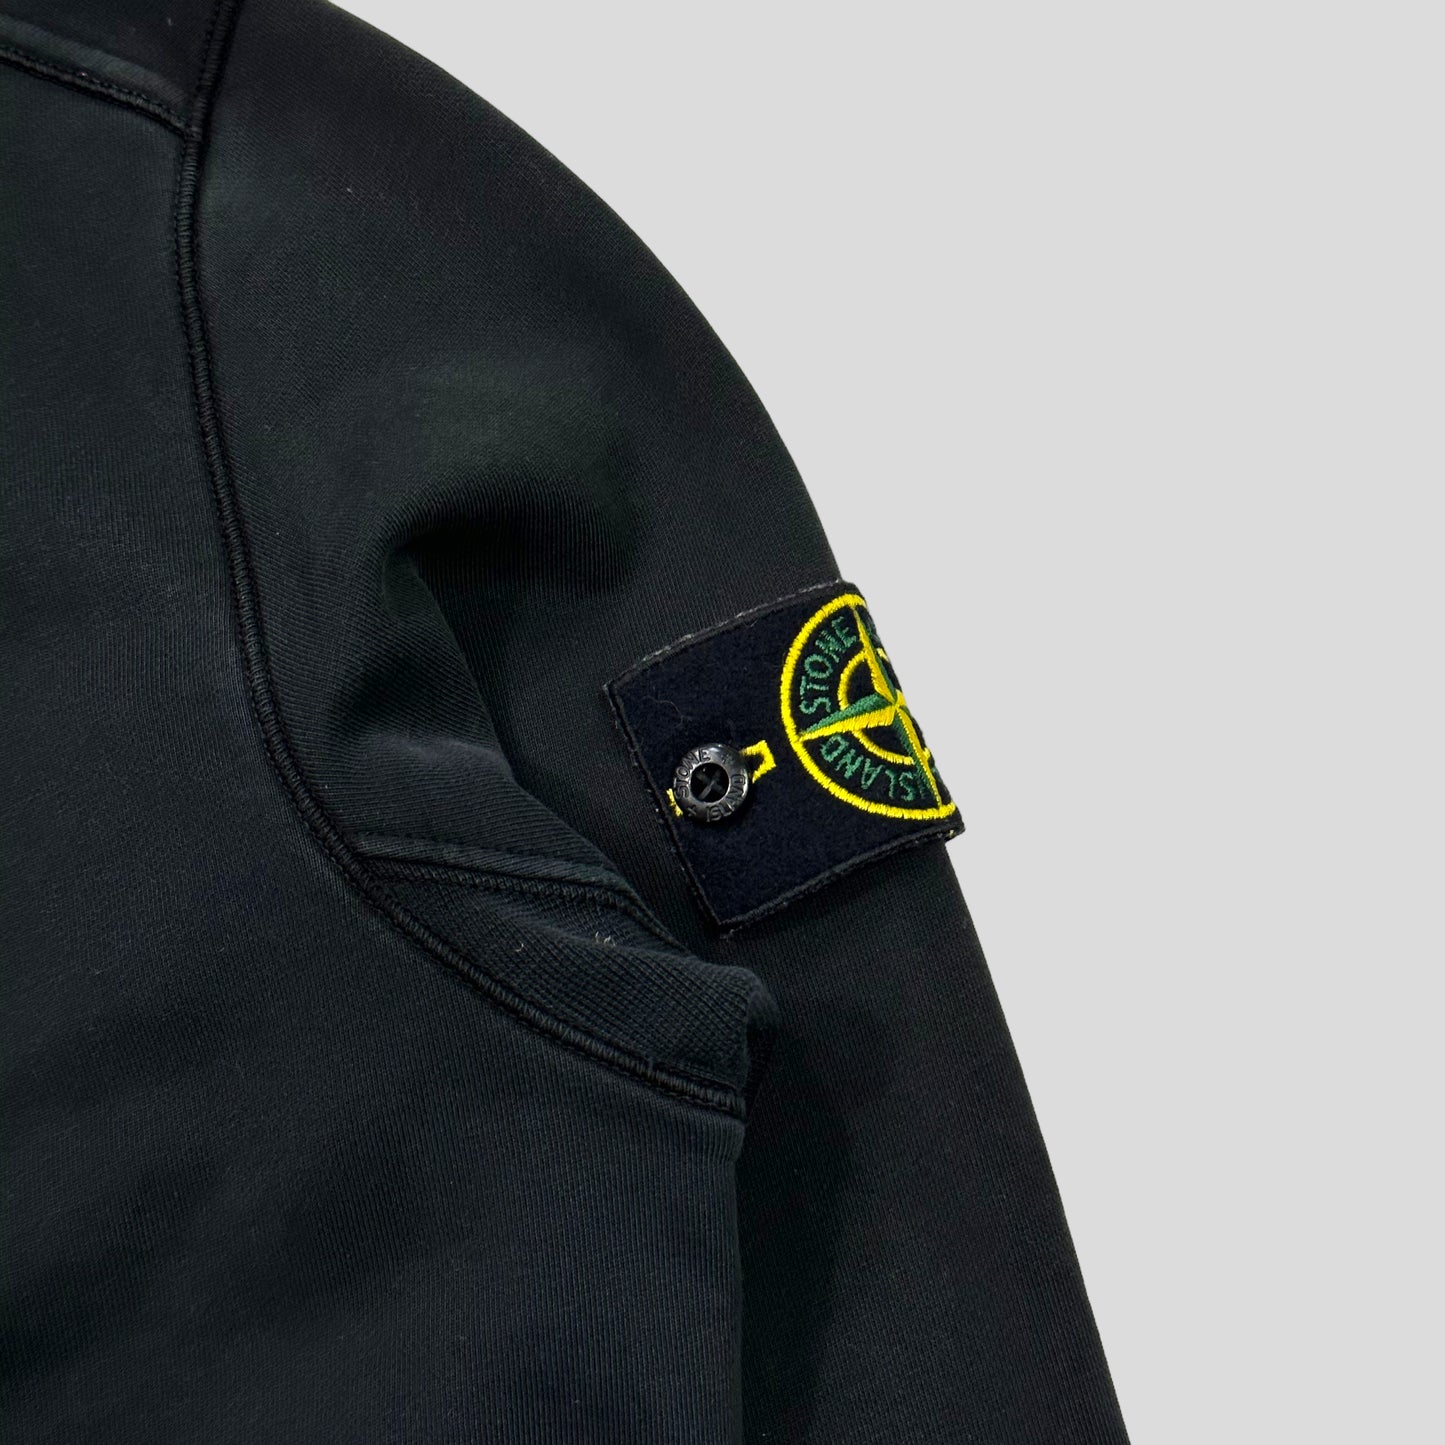 Stone Island AW20 Black Pullover Hoodie - S/M